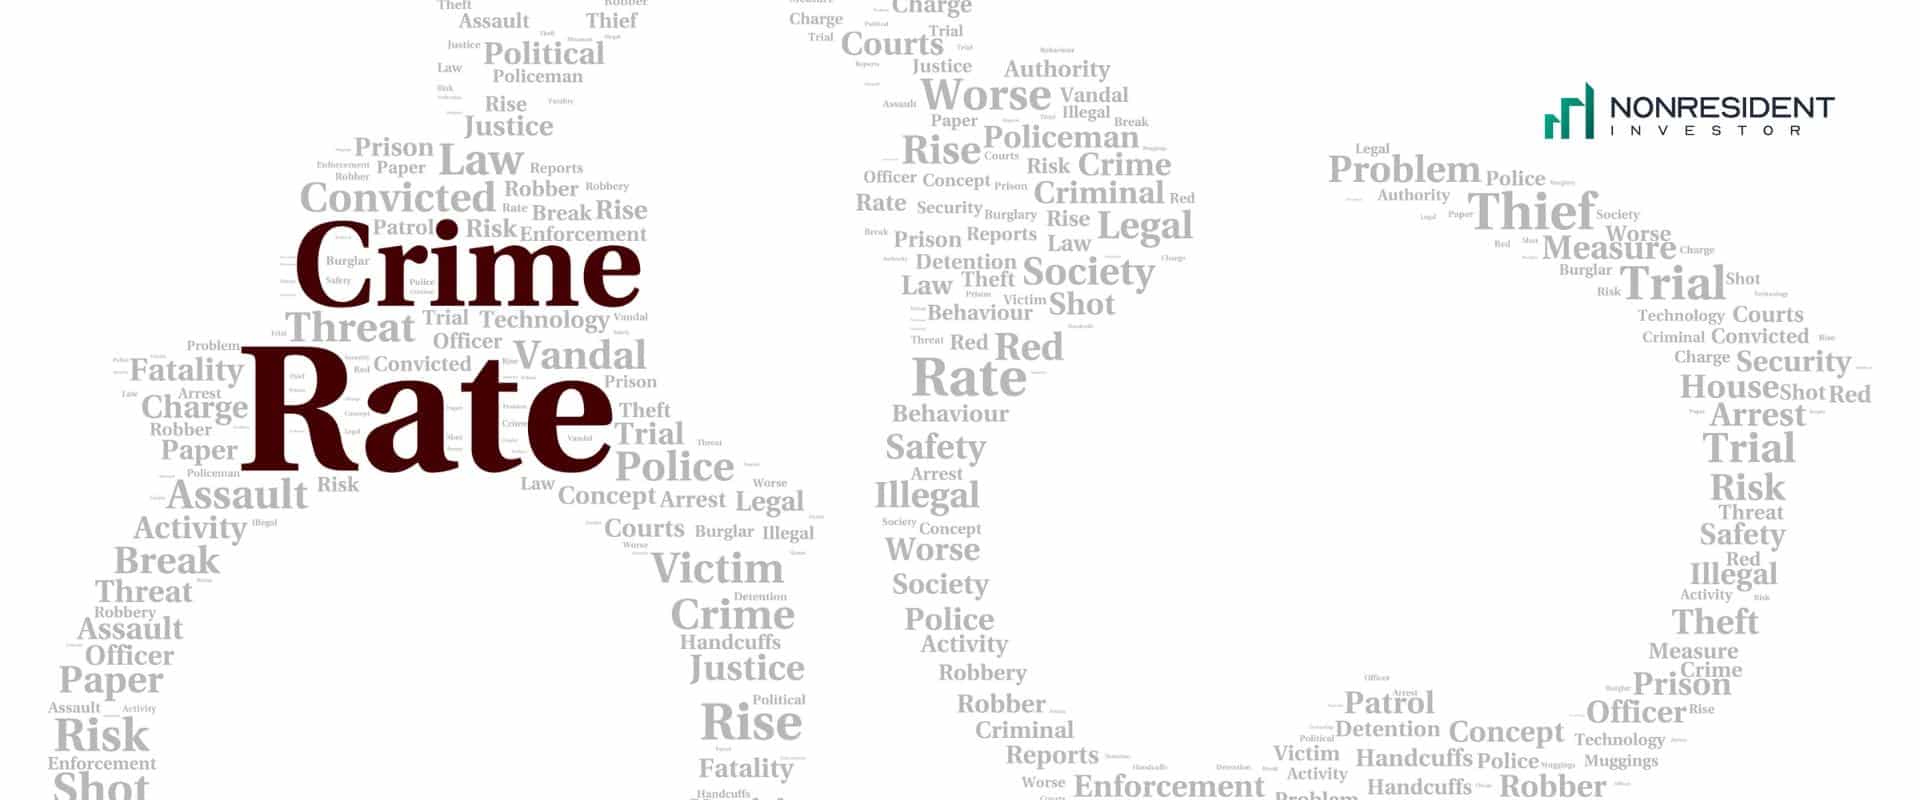 crime rate is something you should consider when looking for houses under 200k